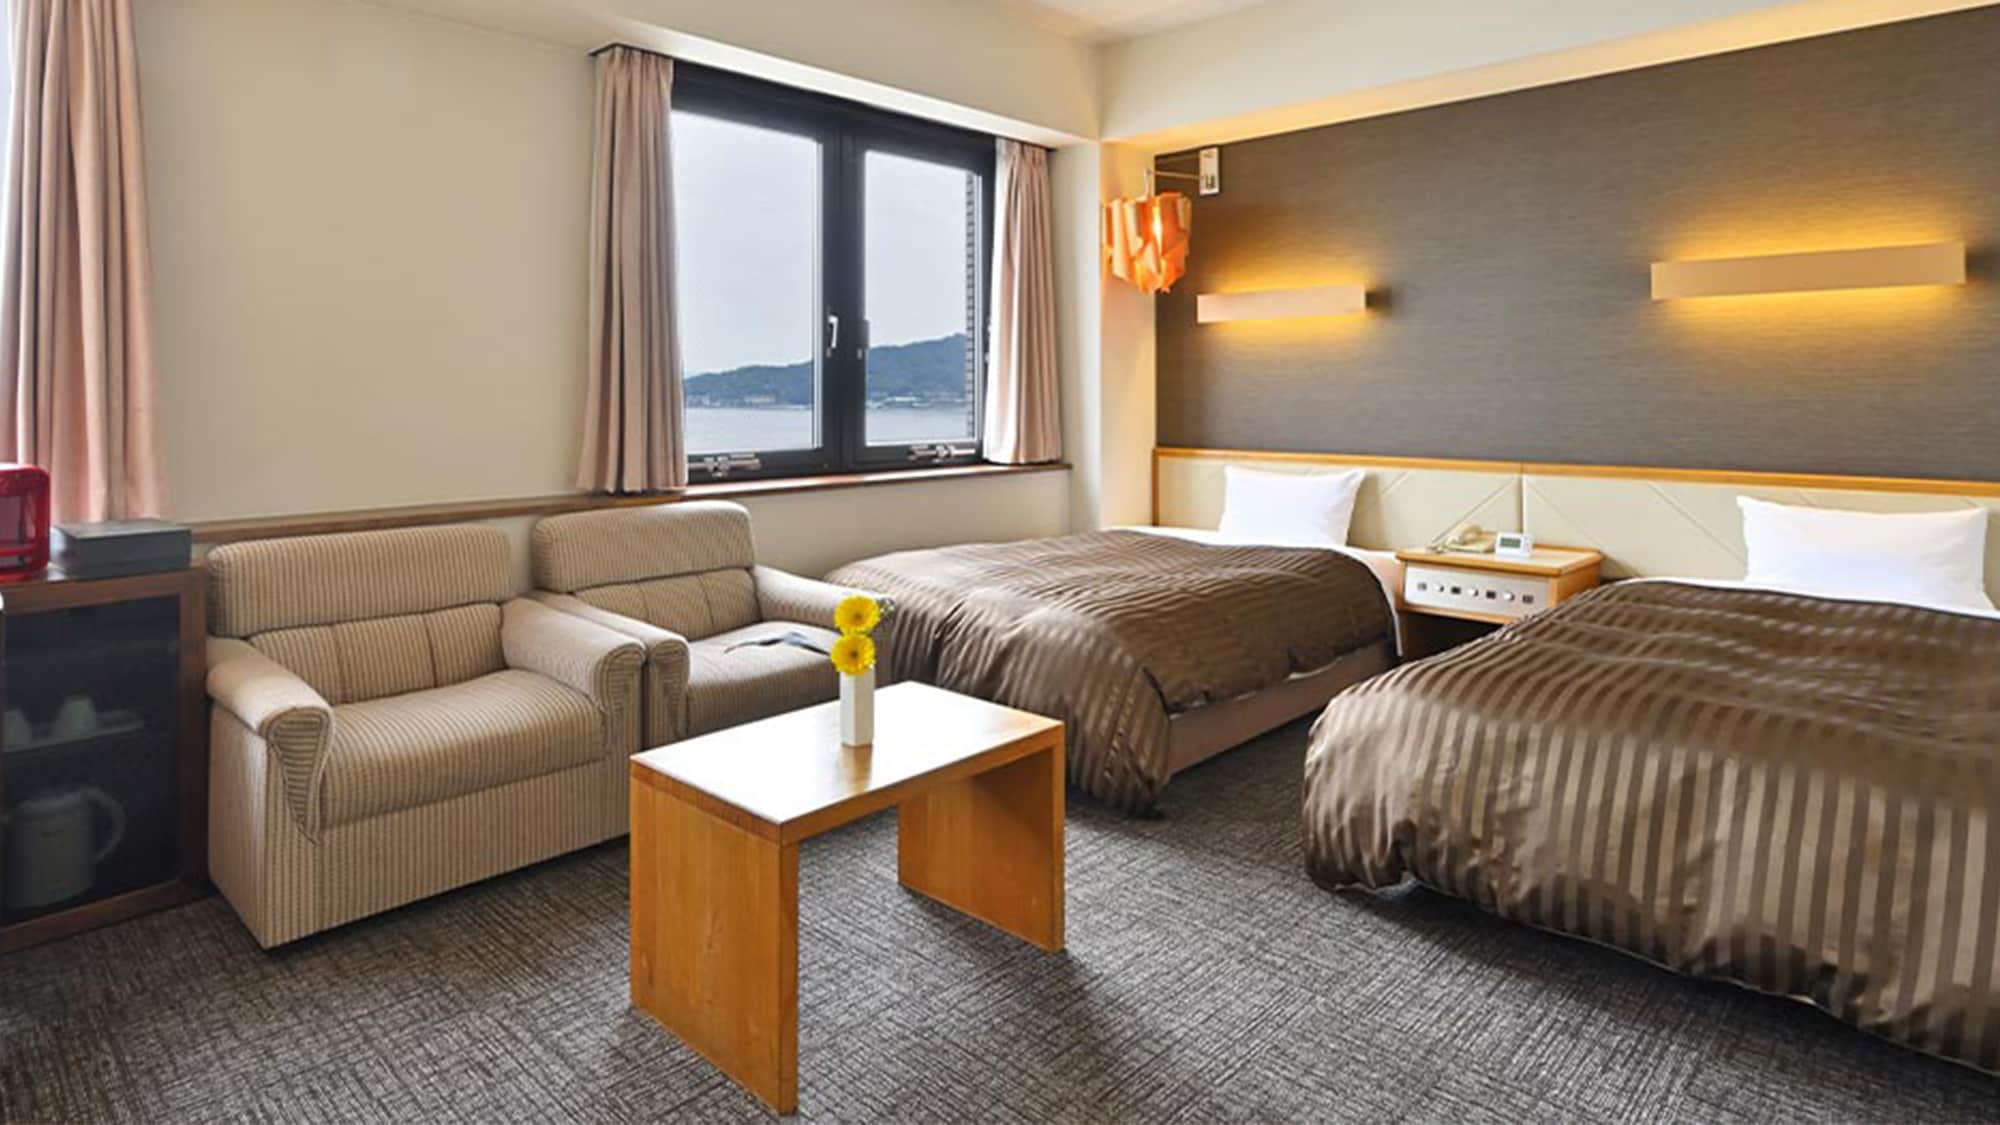 [Deluxe Room] Spacious room of 33 square meters overlooking the Seto Inland Sea